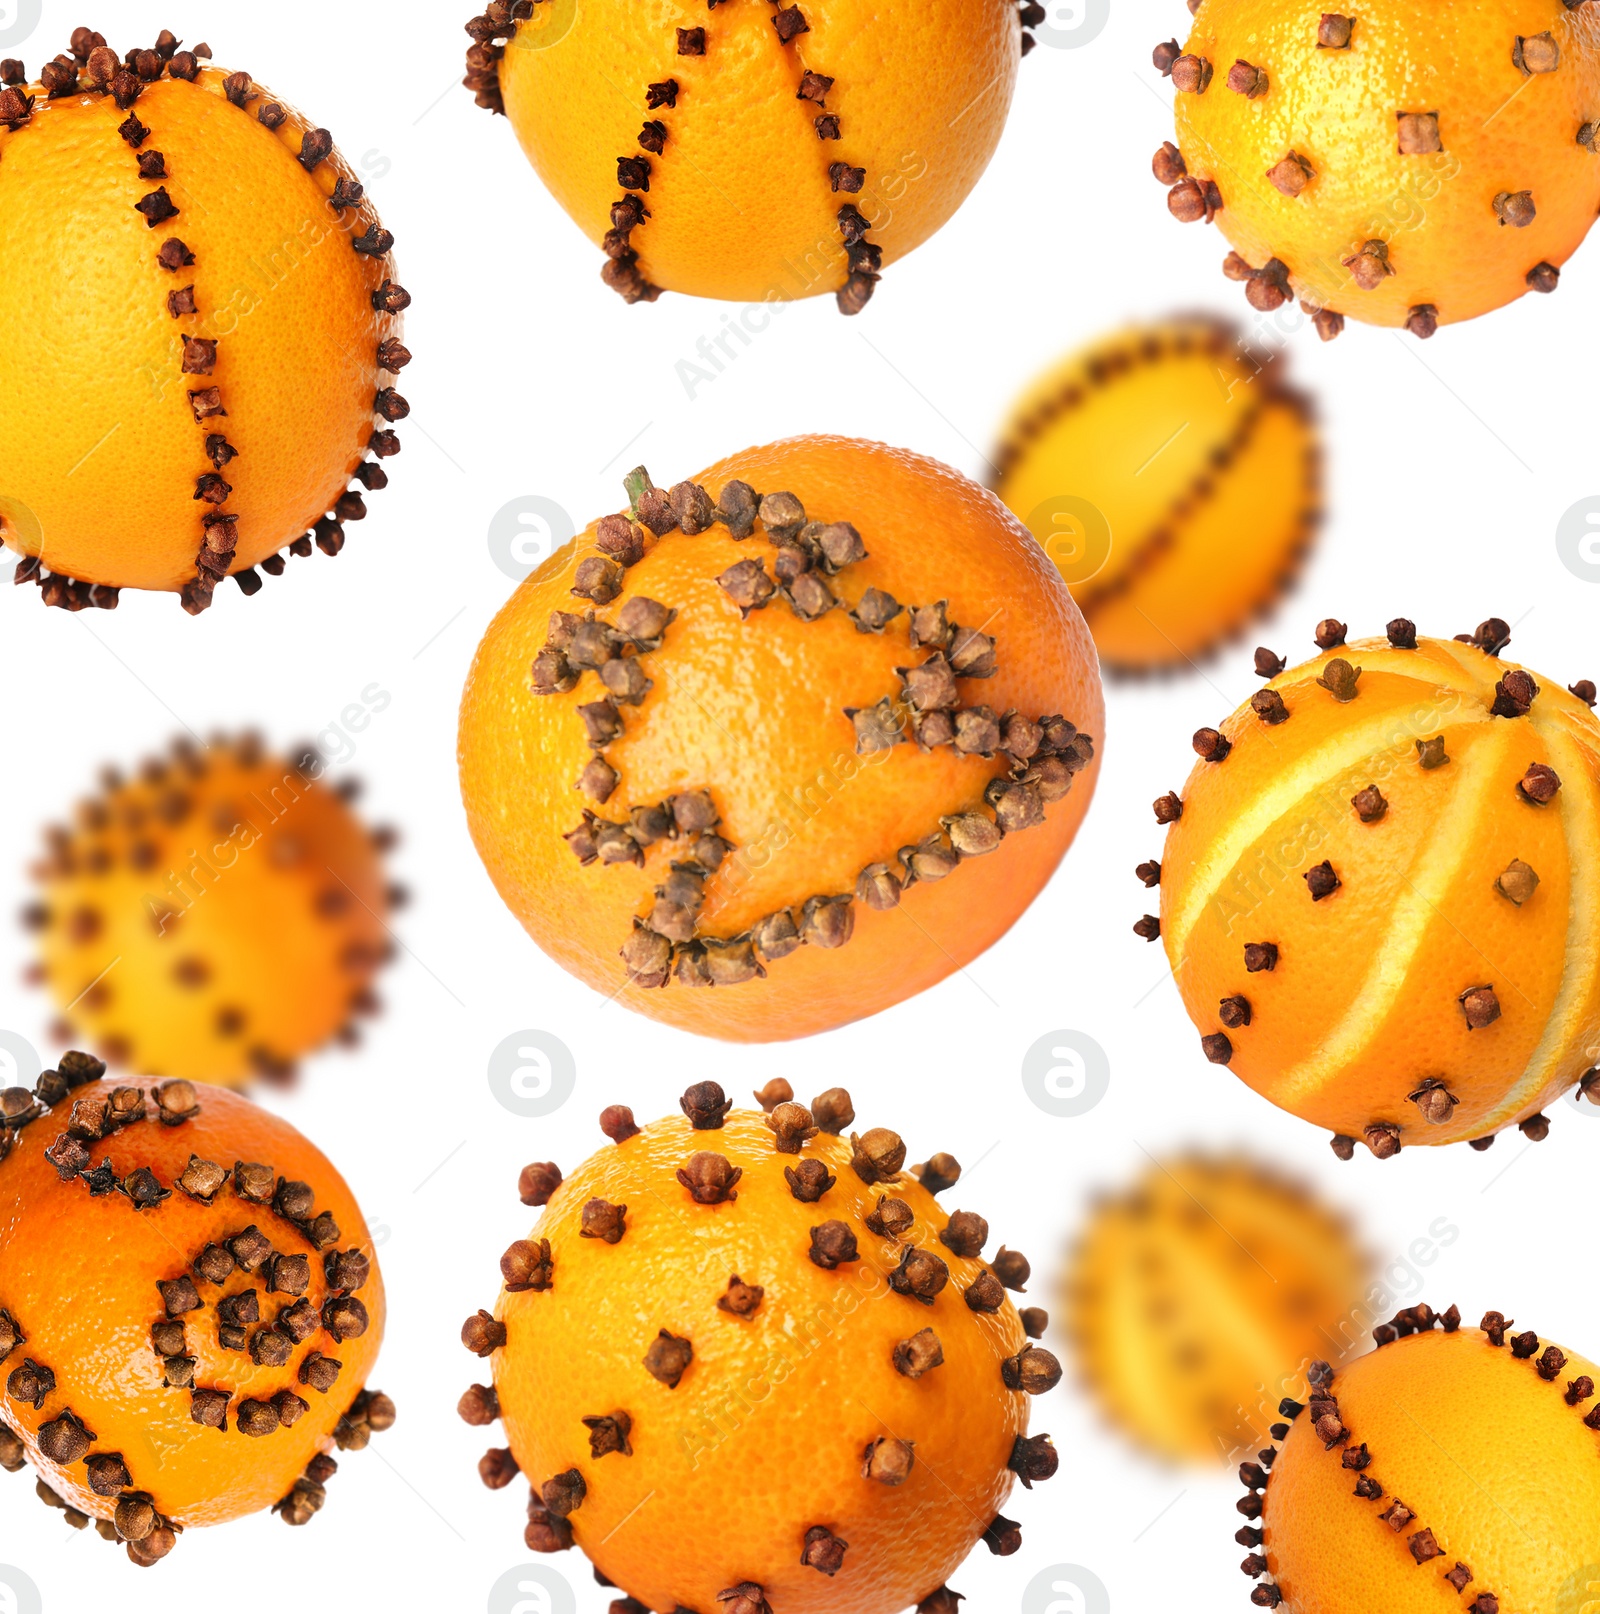 Image of Different pomander balls made of fresh tangerines and cloves falling on white background